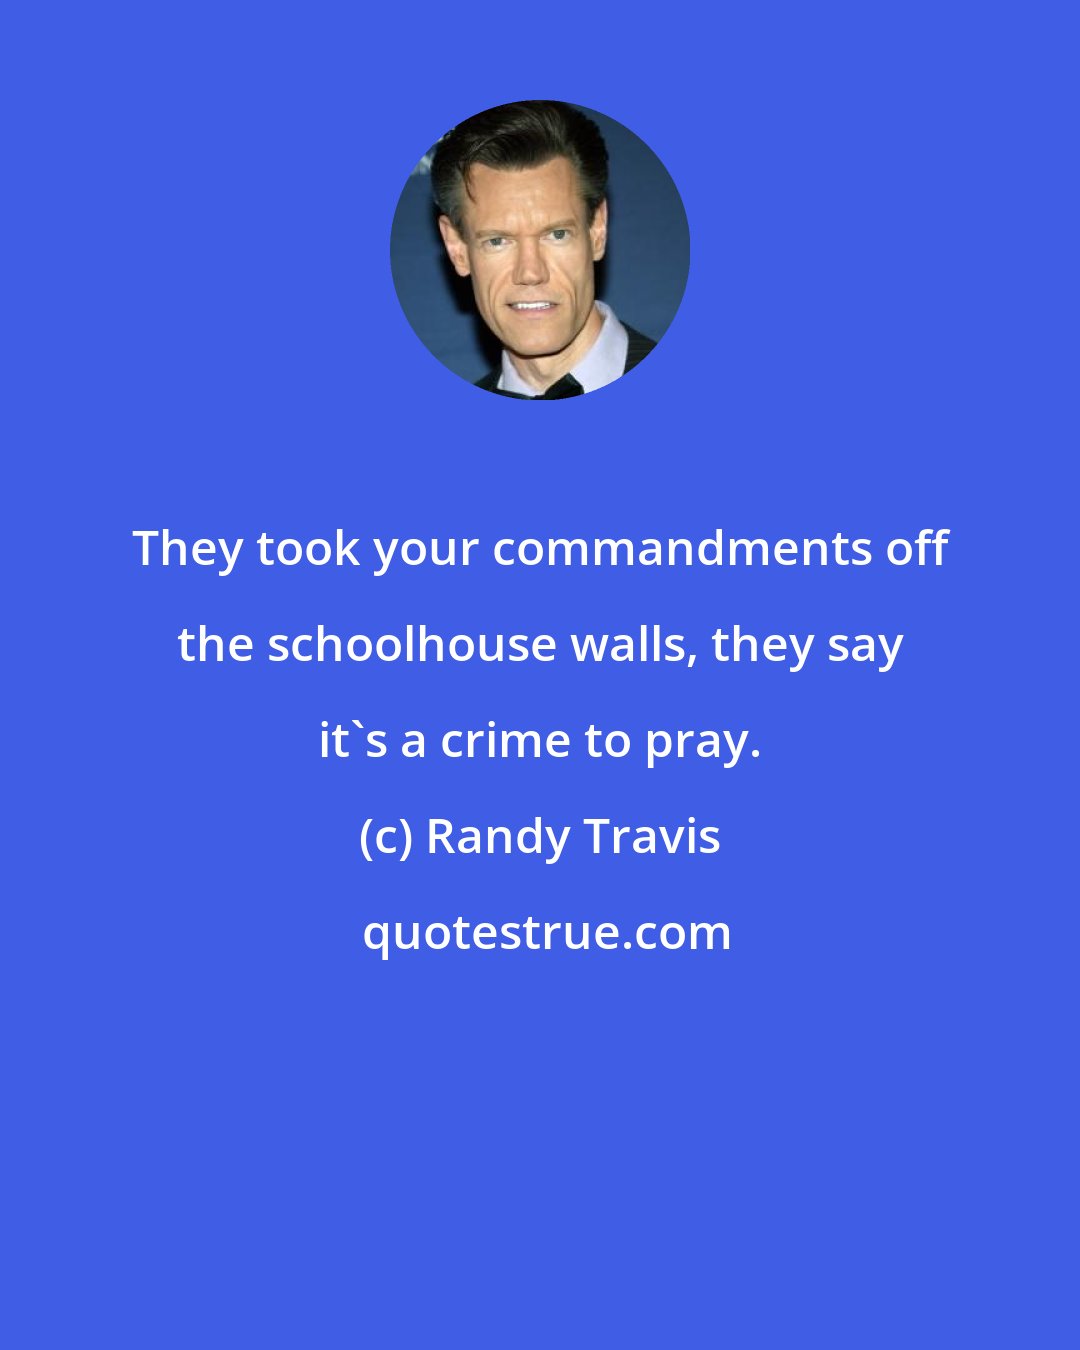 Randy Travis: They took your commandments off the schoolhouse walls, they say it's a crime to pray.